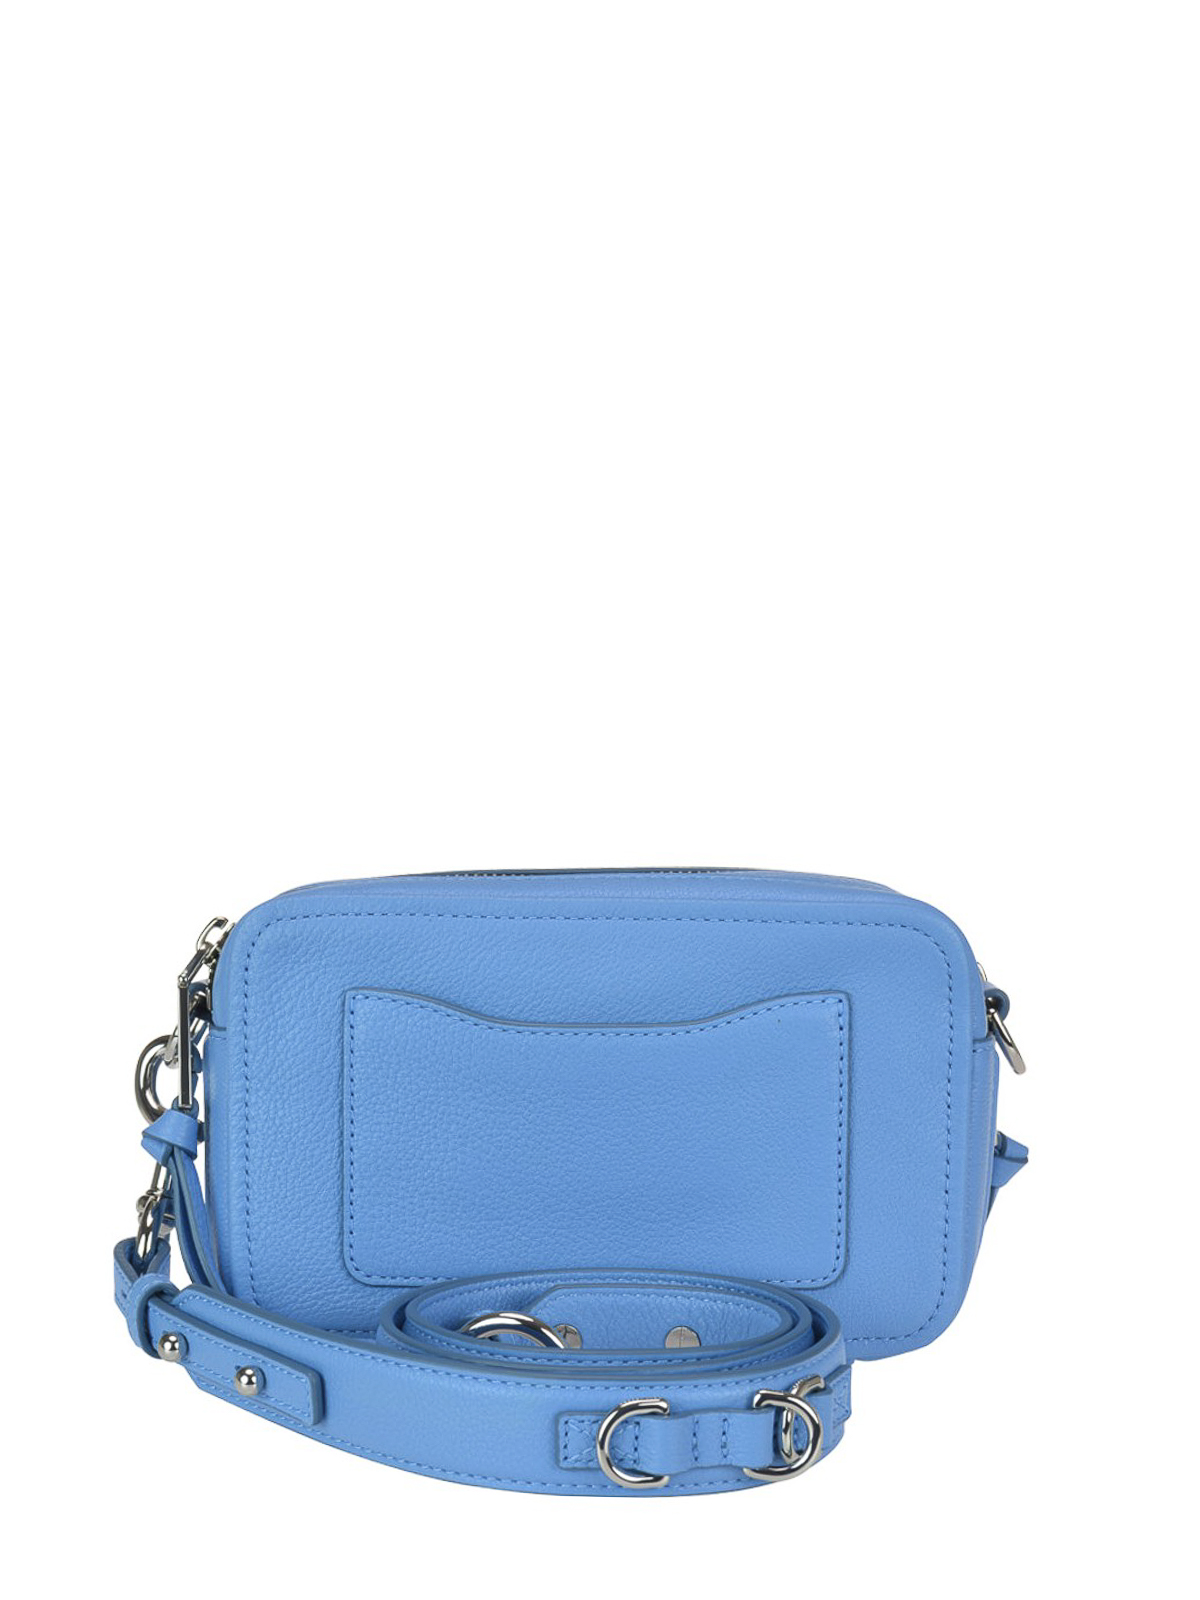 Marc Jacobs Softshot 21 Leather Crossbody Bag in Green